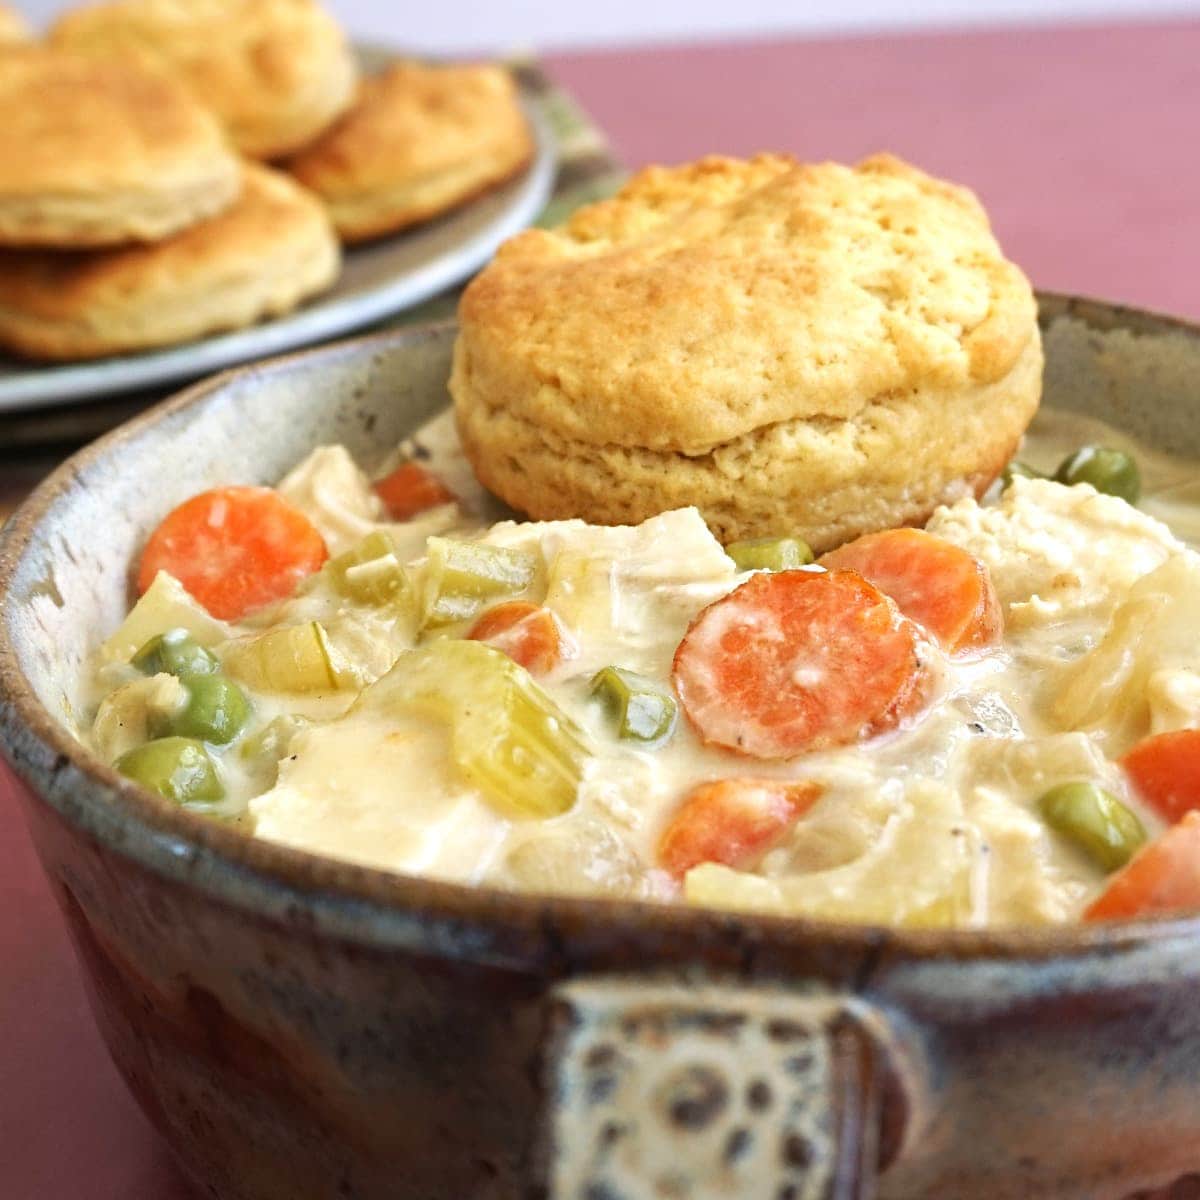 Crustless Chicken Pot Pie with a biscuit on the side